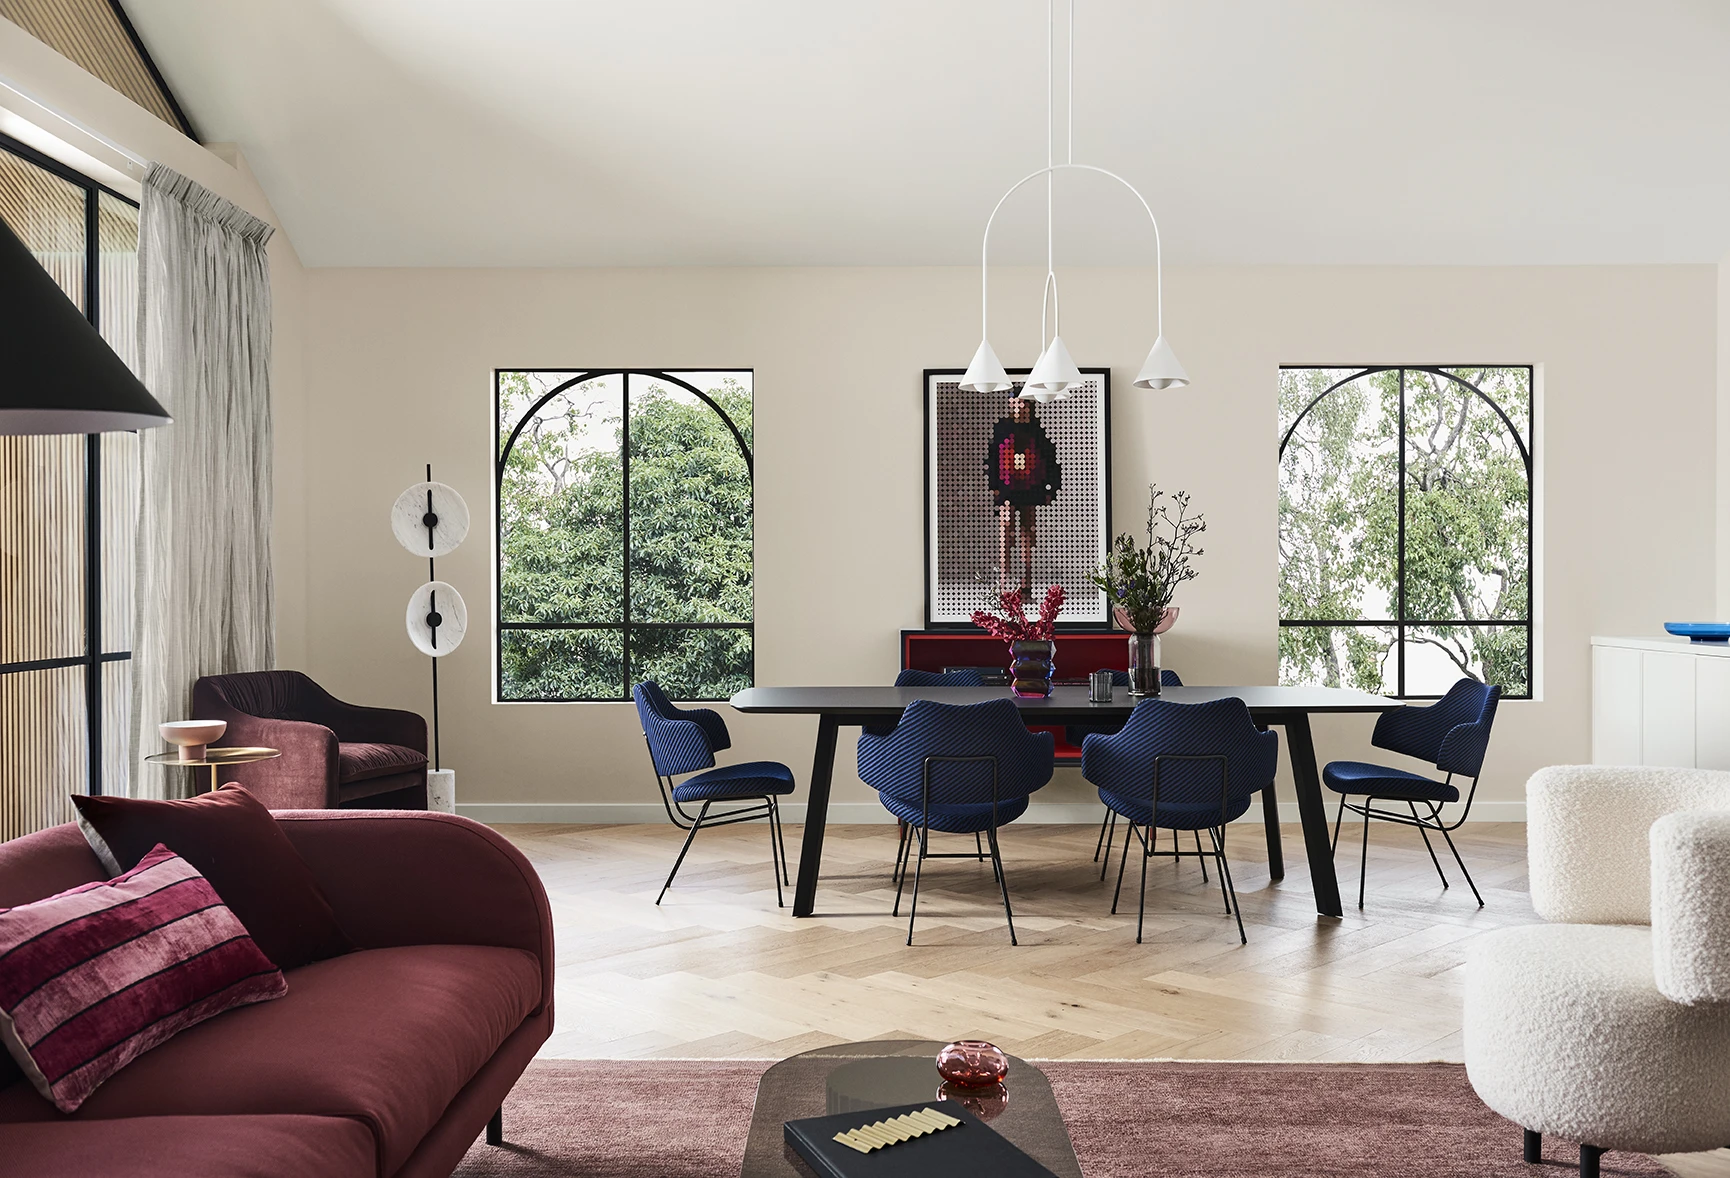 Dining room with Clay Pipe Half coloured walls and White Dune Quarter coloured ceilings, black table with dark navy chairs. Wall featured artwork, a small red buffet against the wall and a stylish lamp in the corner. Table is topped with vases of flowers.